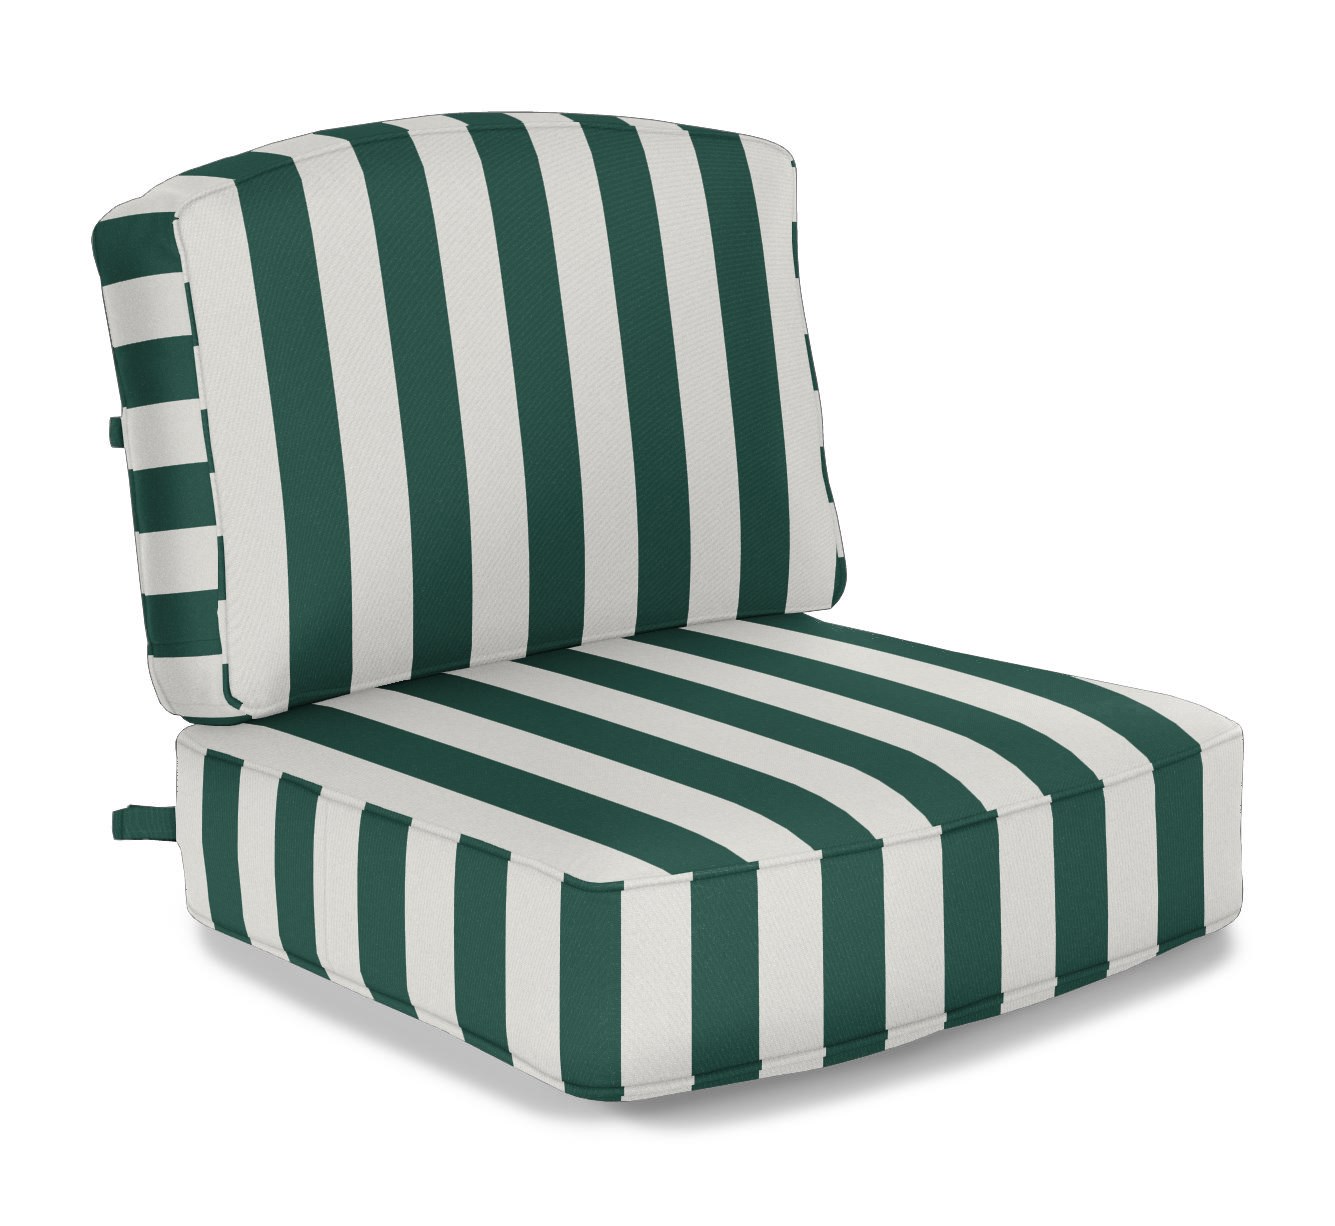 Hanamint Grand Tuscany Style Deep Seating Cushion in Kinzie Forest Green Clearance